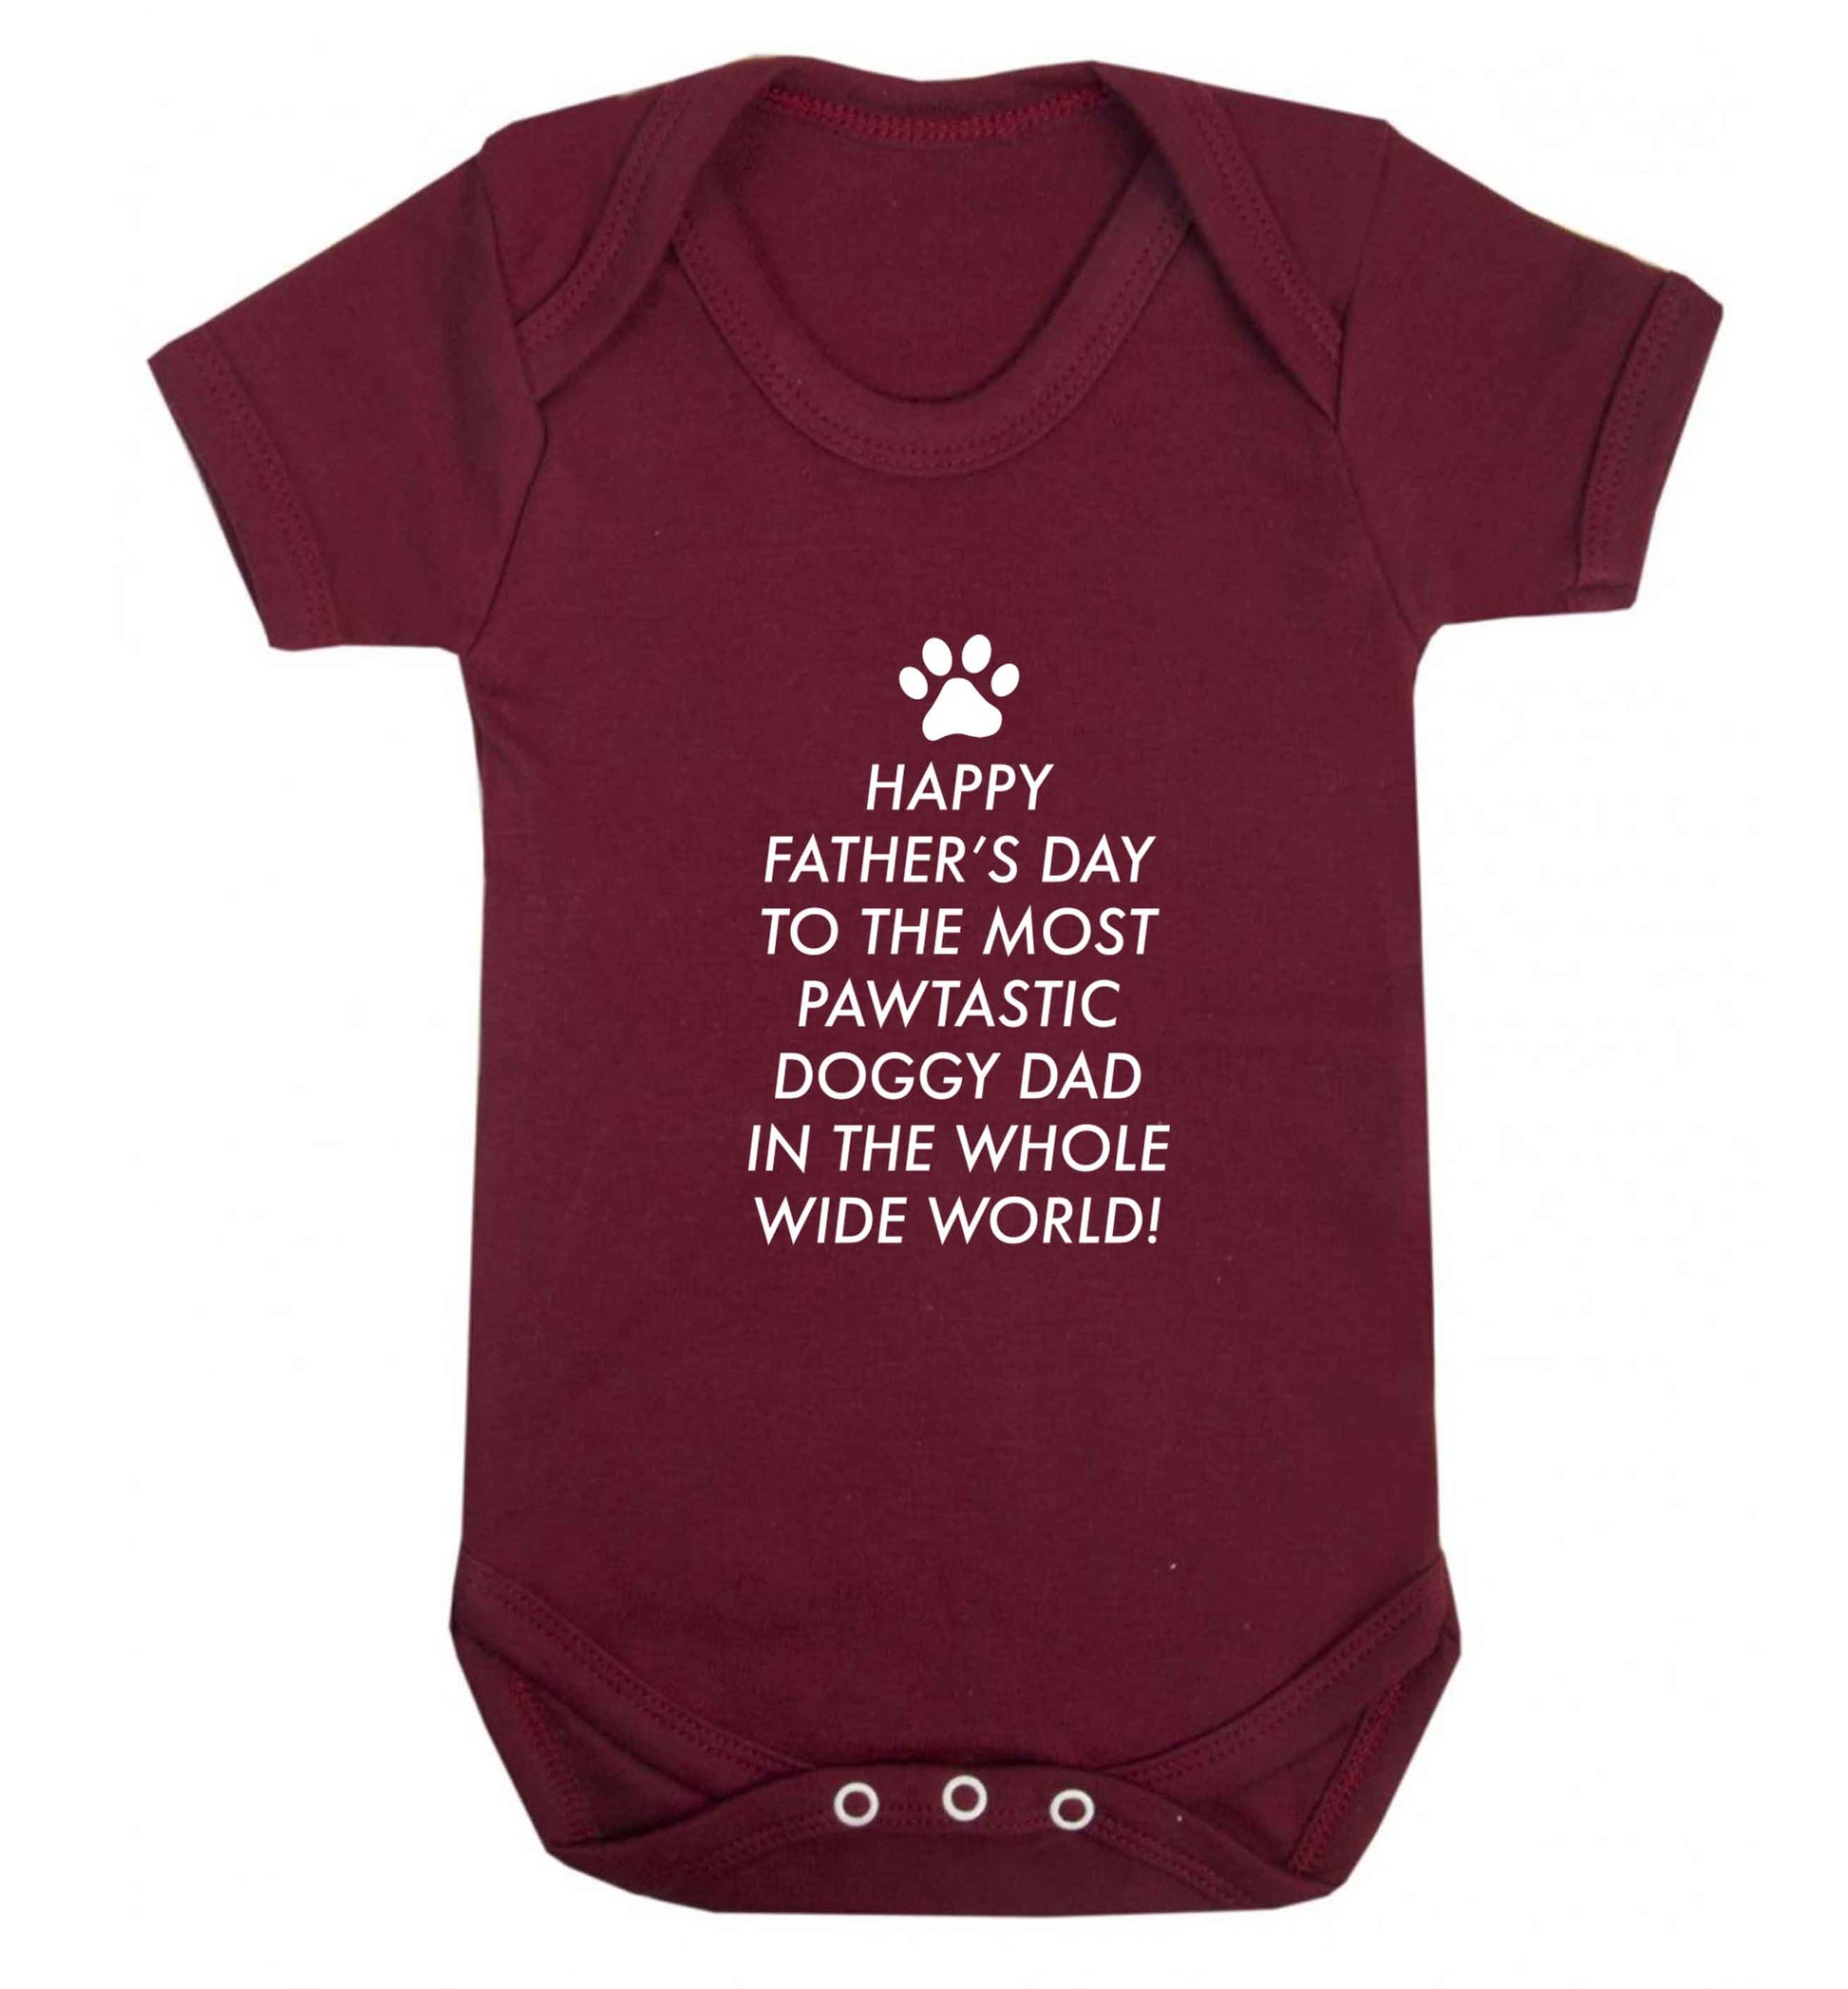 Happy Father's day to the most pawtastic doggy dad in the whole wide world!baby vest maroon 18-24 months